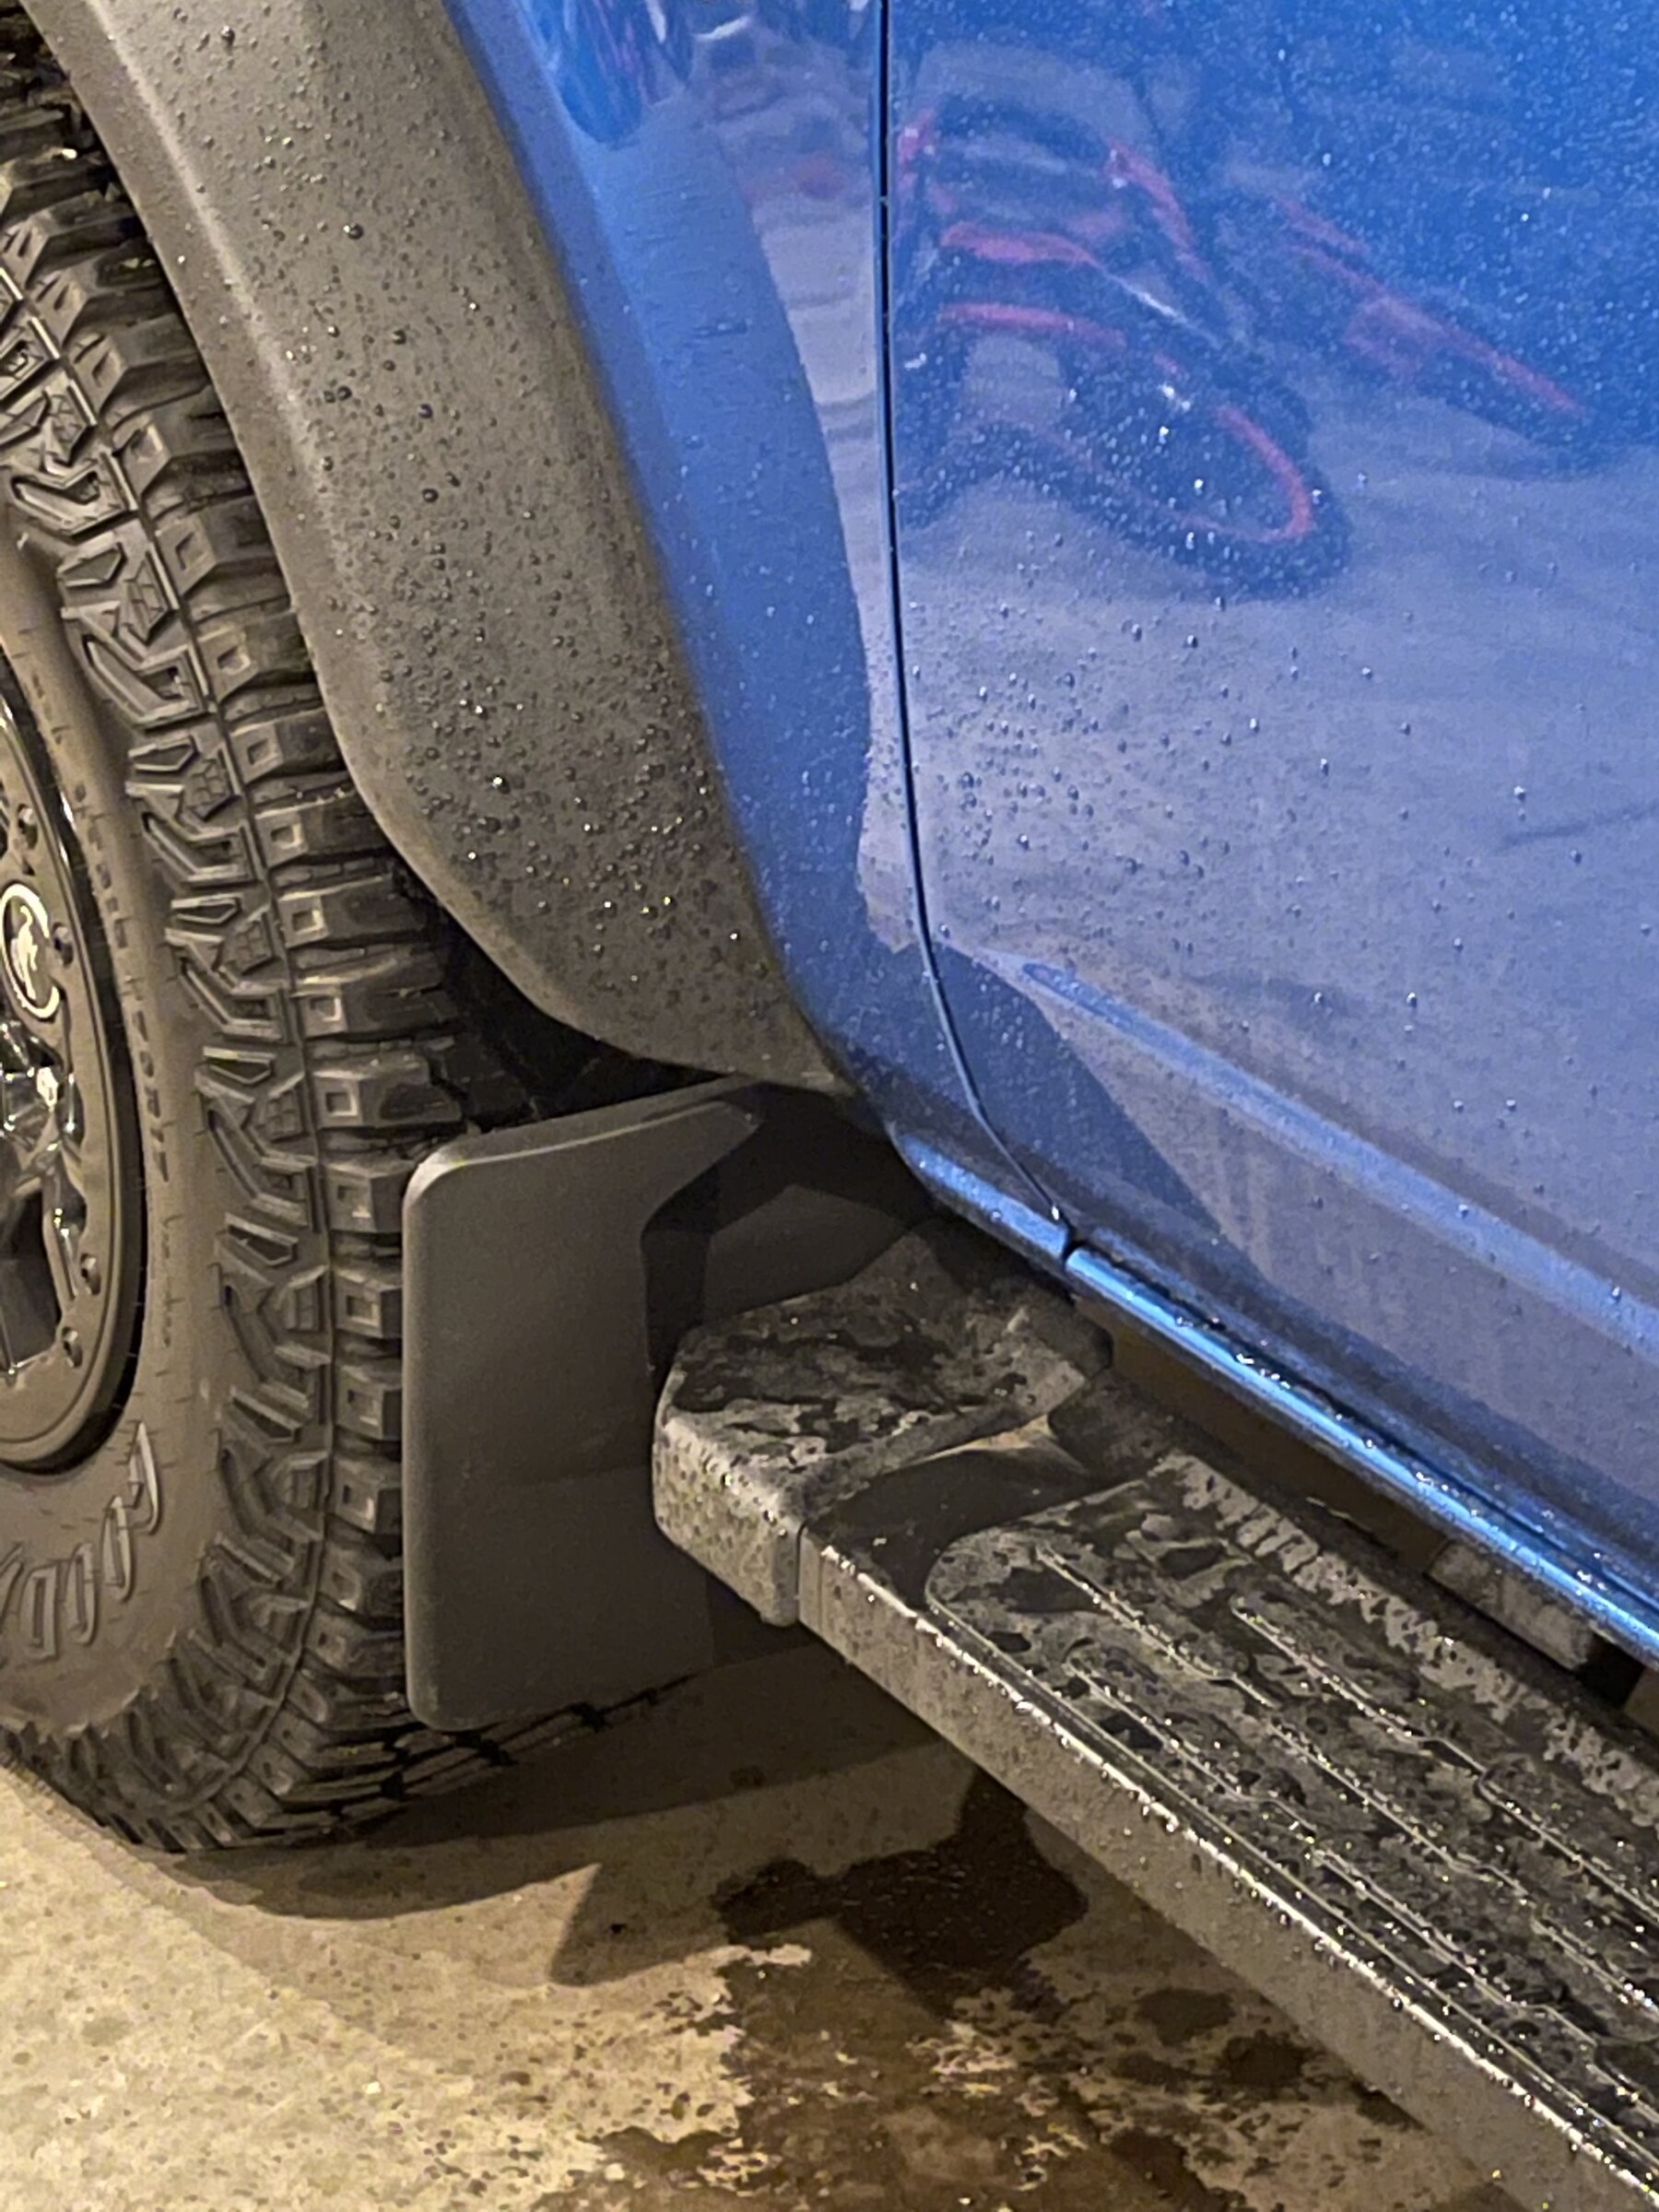 Ford Bronco Weather Tech Mud Flaps for Wildtrack installed E0F4C6A5-DC9F-4DA3-ABB5-DCA7BBA15416